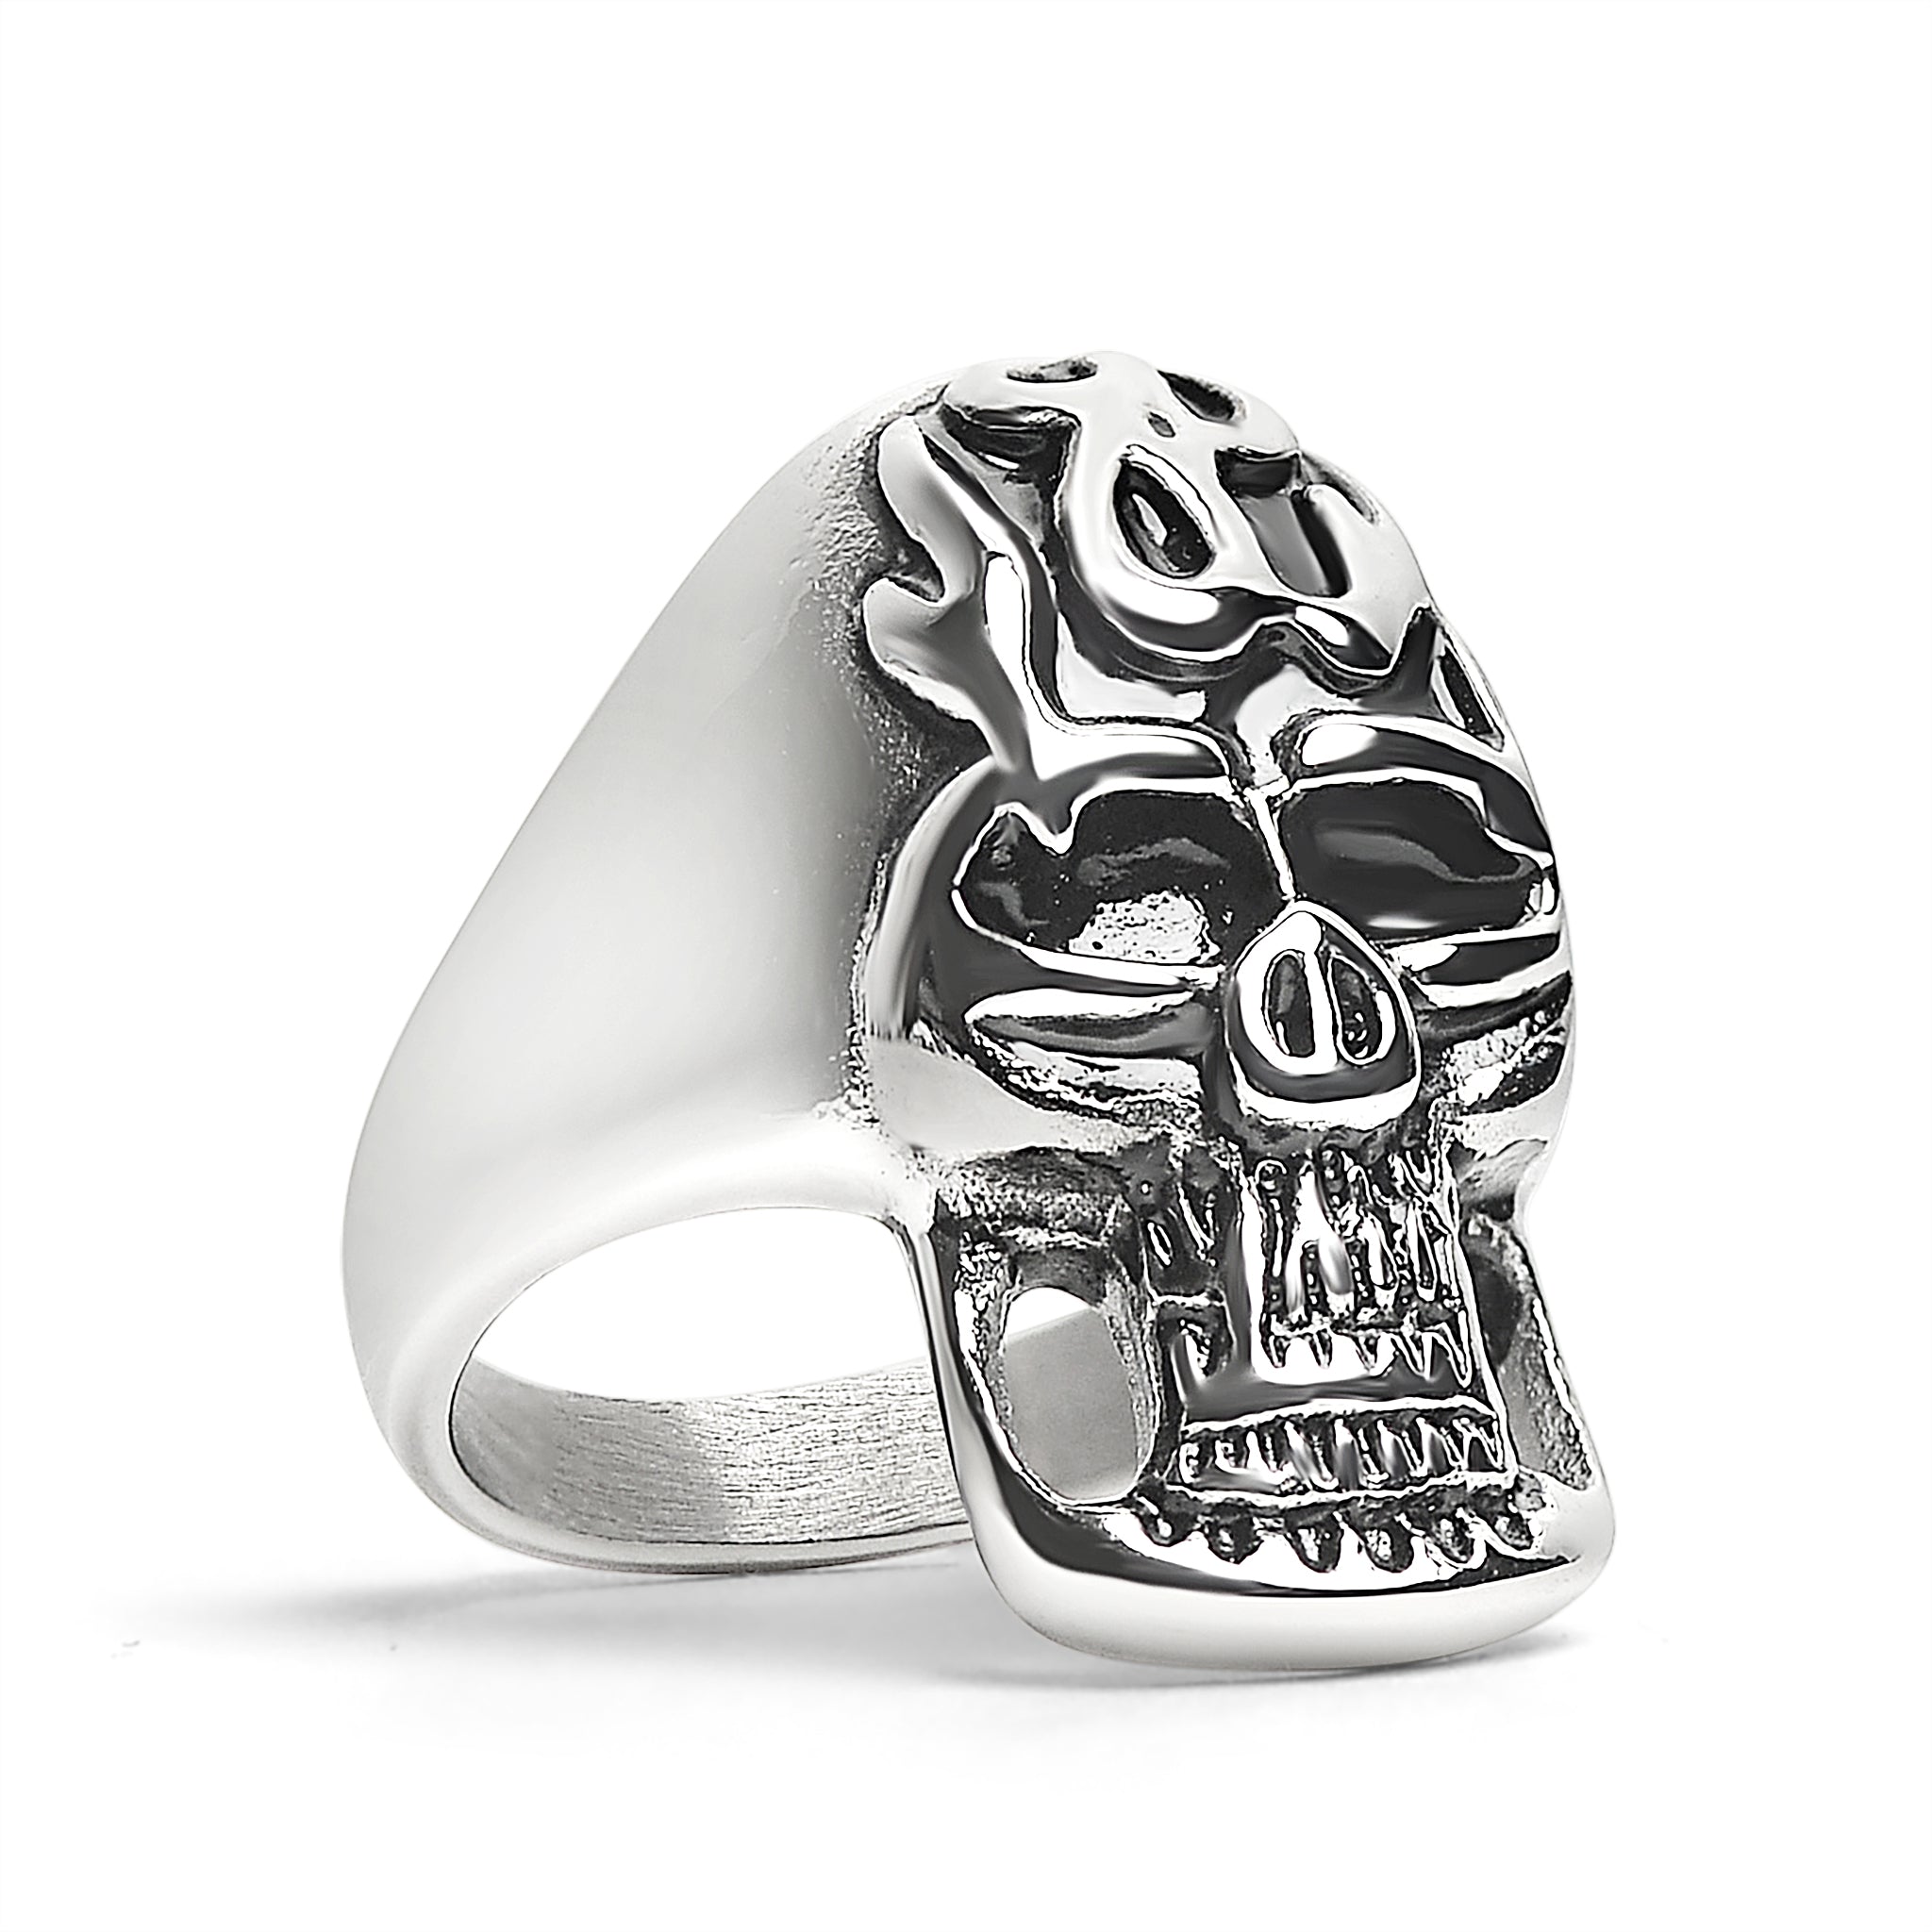 Stainless Steel Flaming Skull Ring - Polished Band for Men's Biker/Goth Style - Jewelry & Watches - Bijou Her -  -  - 